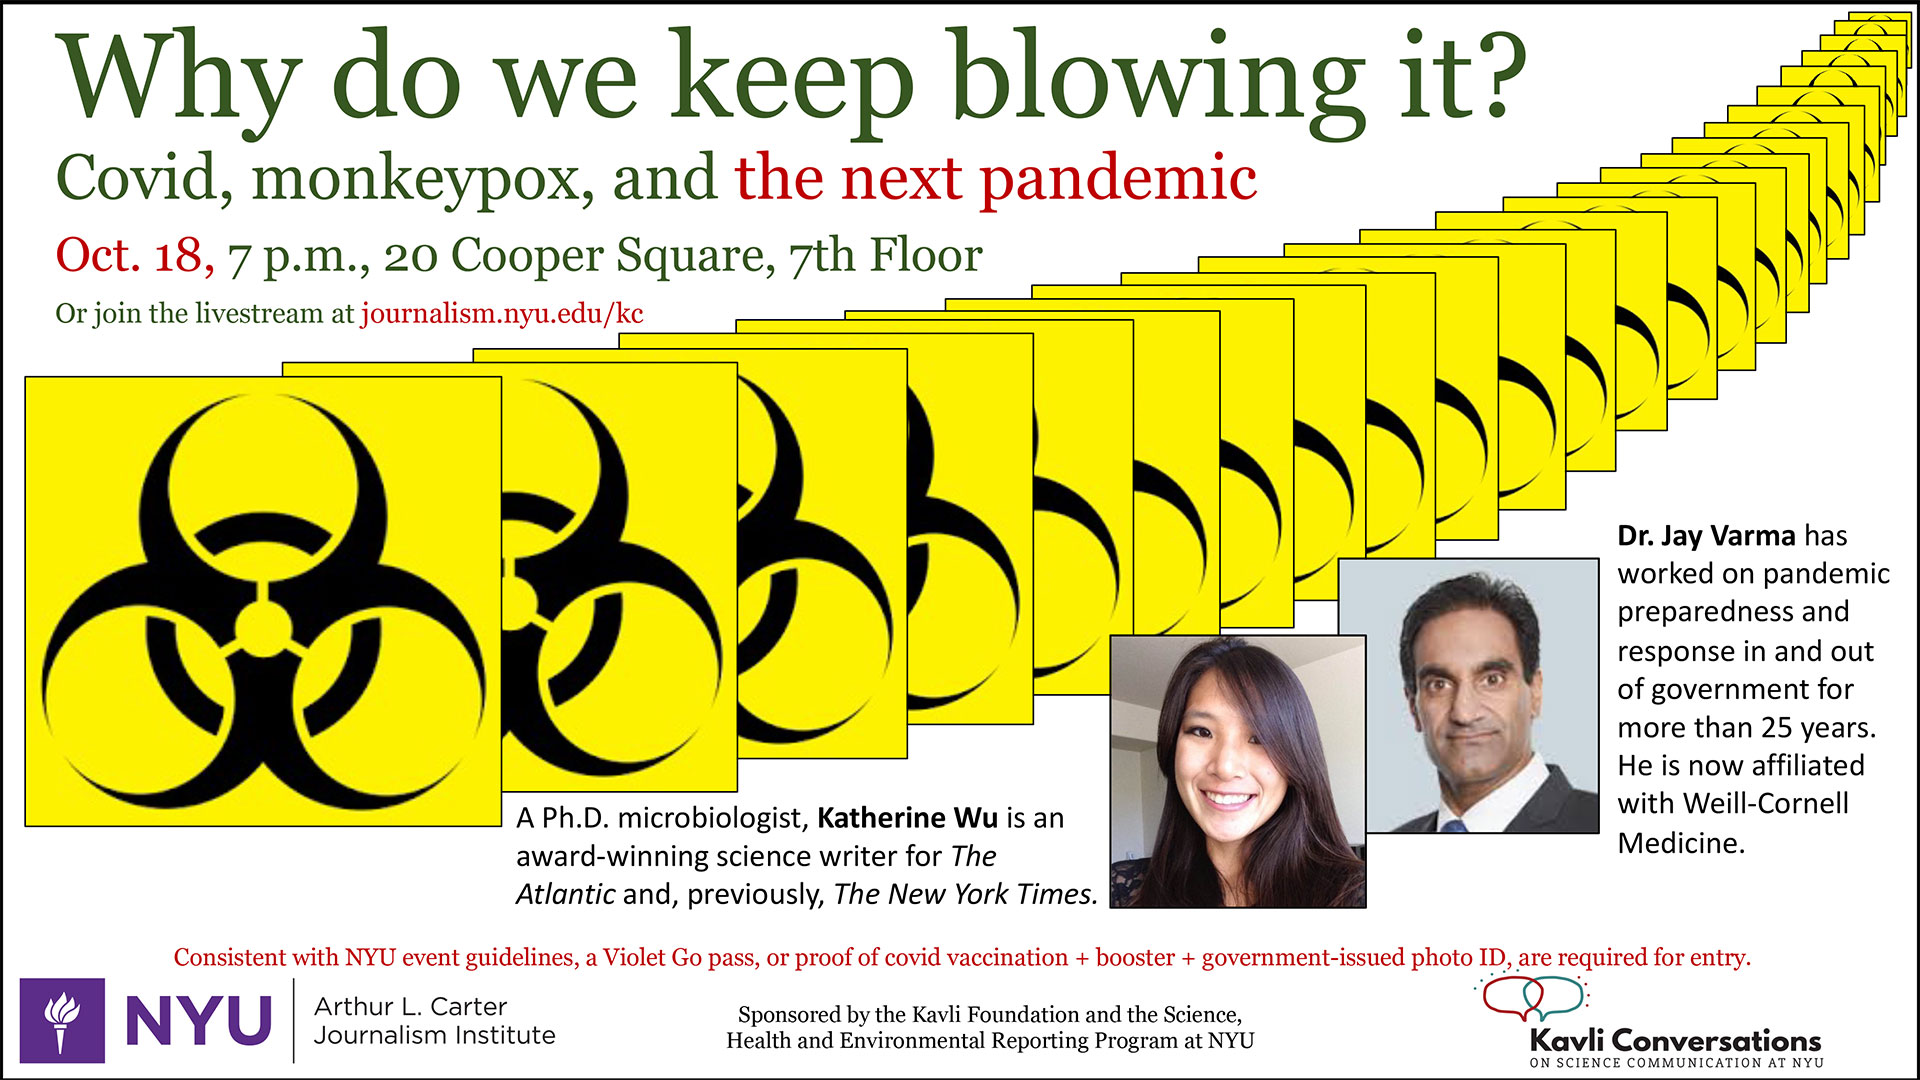 Event Poster - Why do we keep blowing it? Covid, monkeypox and the next pandemic. - See event page for details